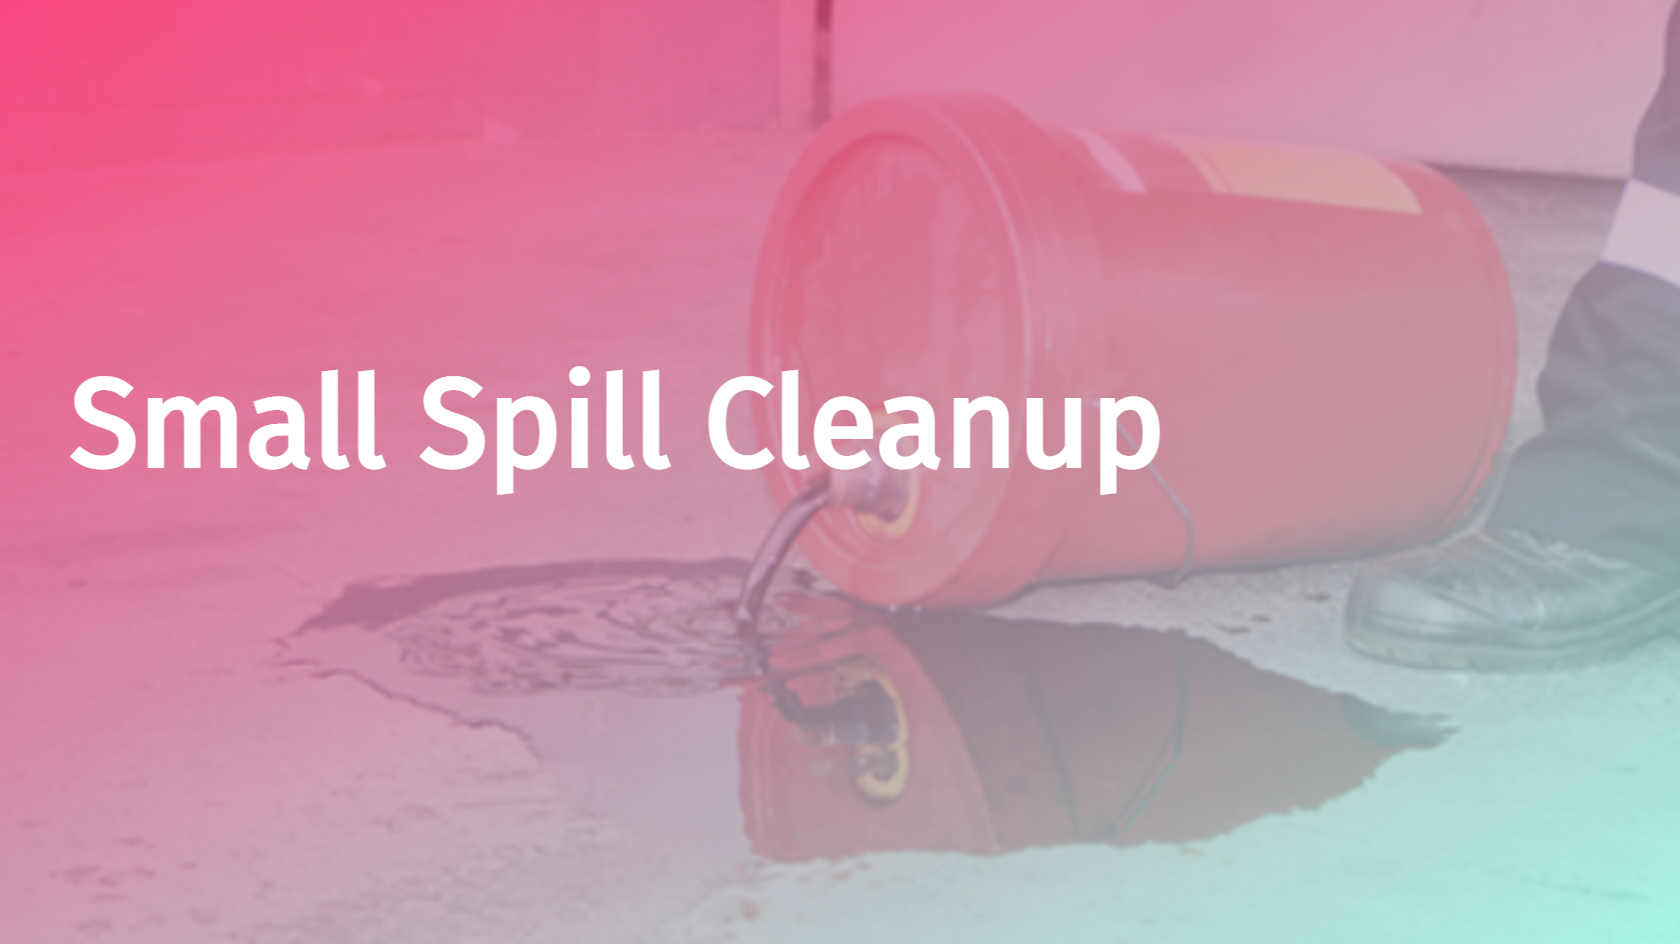 Small Spill Cleanup